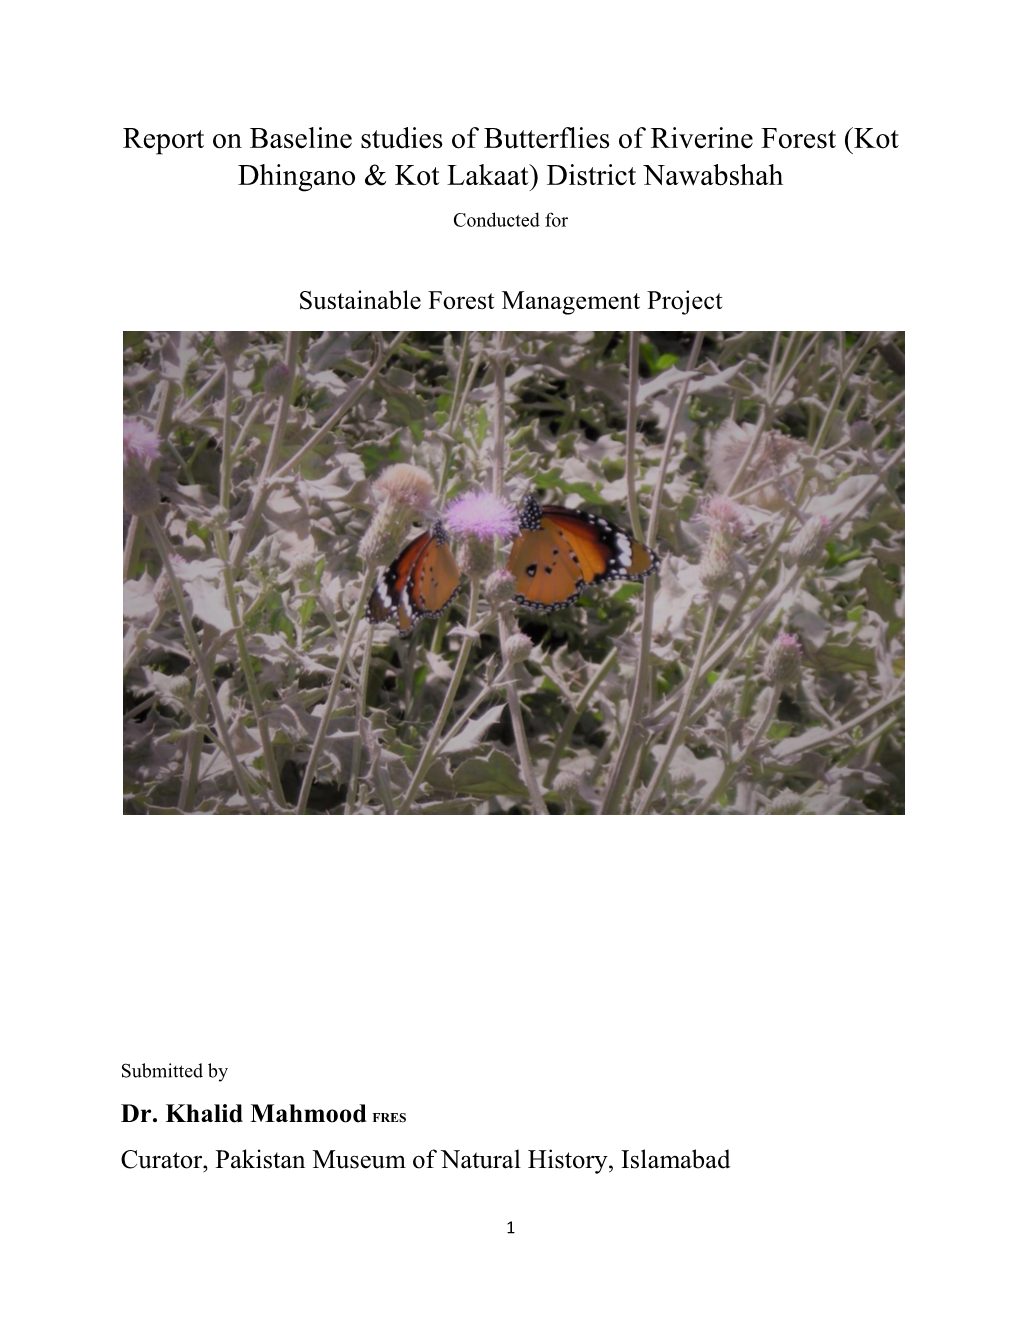 Report on Baseline Studies of Butterflies of Riverine Forest (Kot Dhingano & Kot Lakaat) District Nawabshah Conducted For